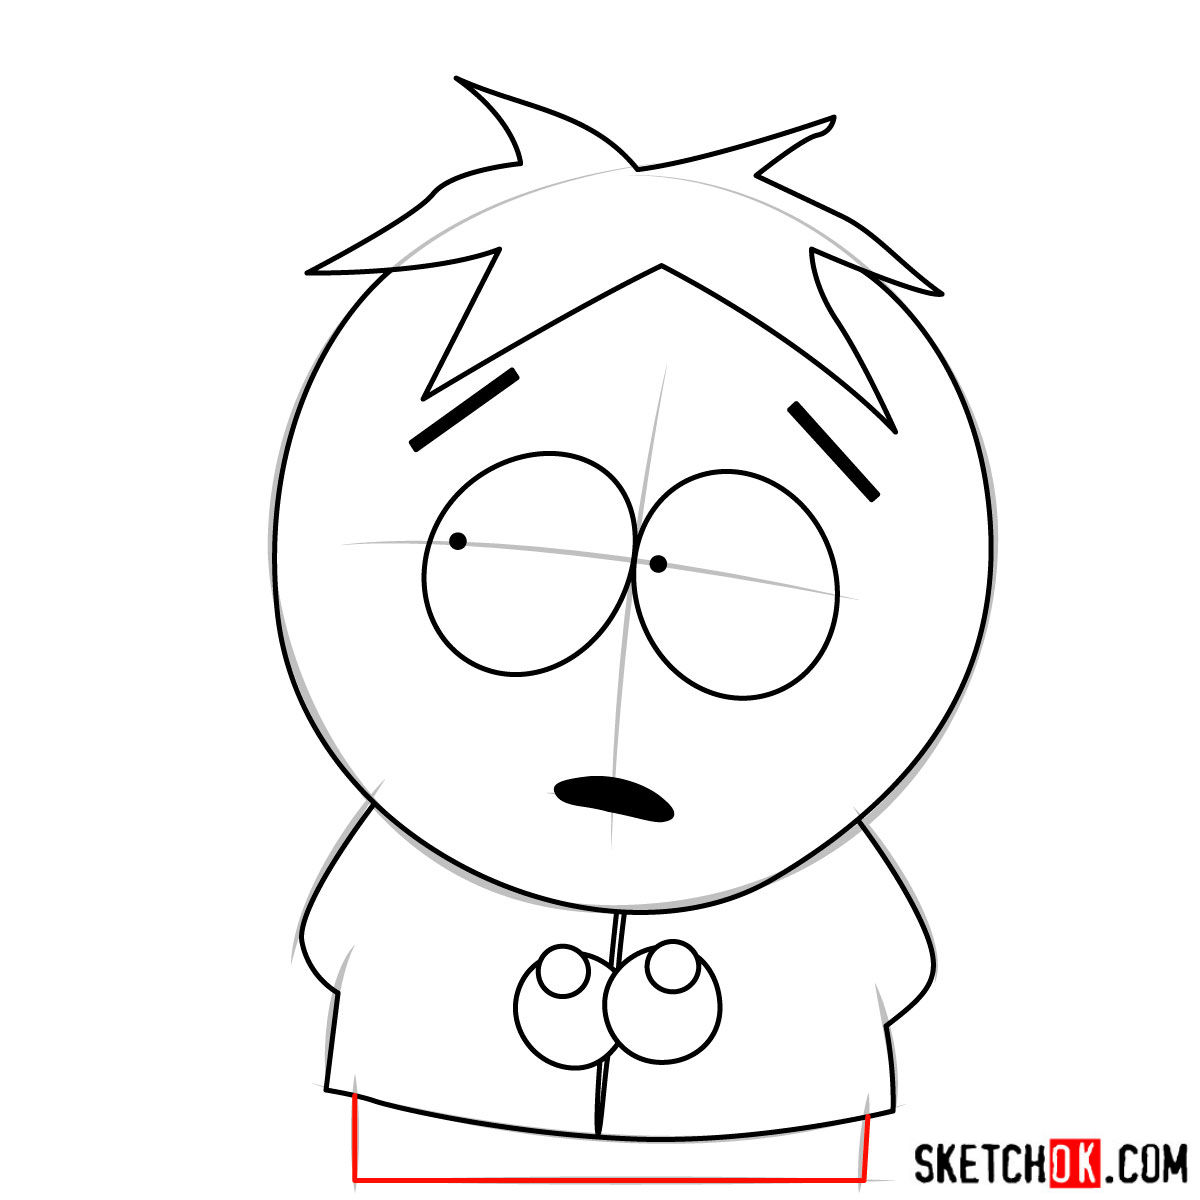 How to draw Butters Stotch - step 06